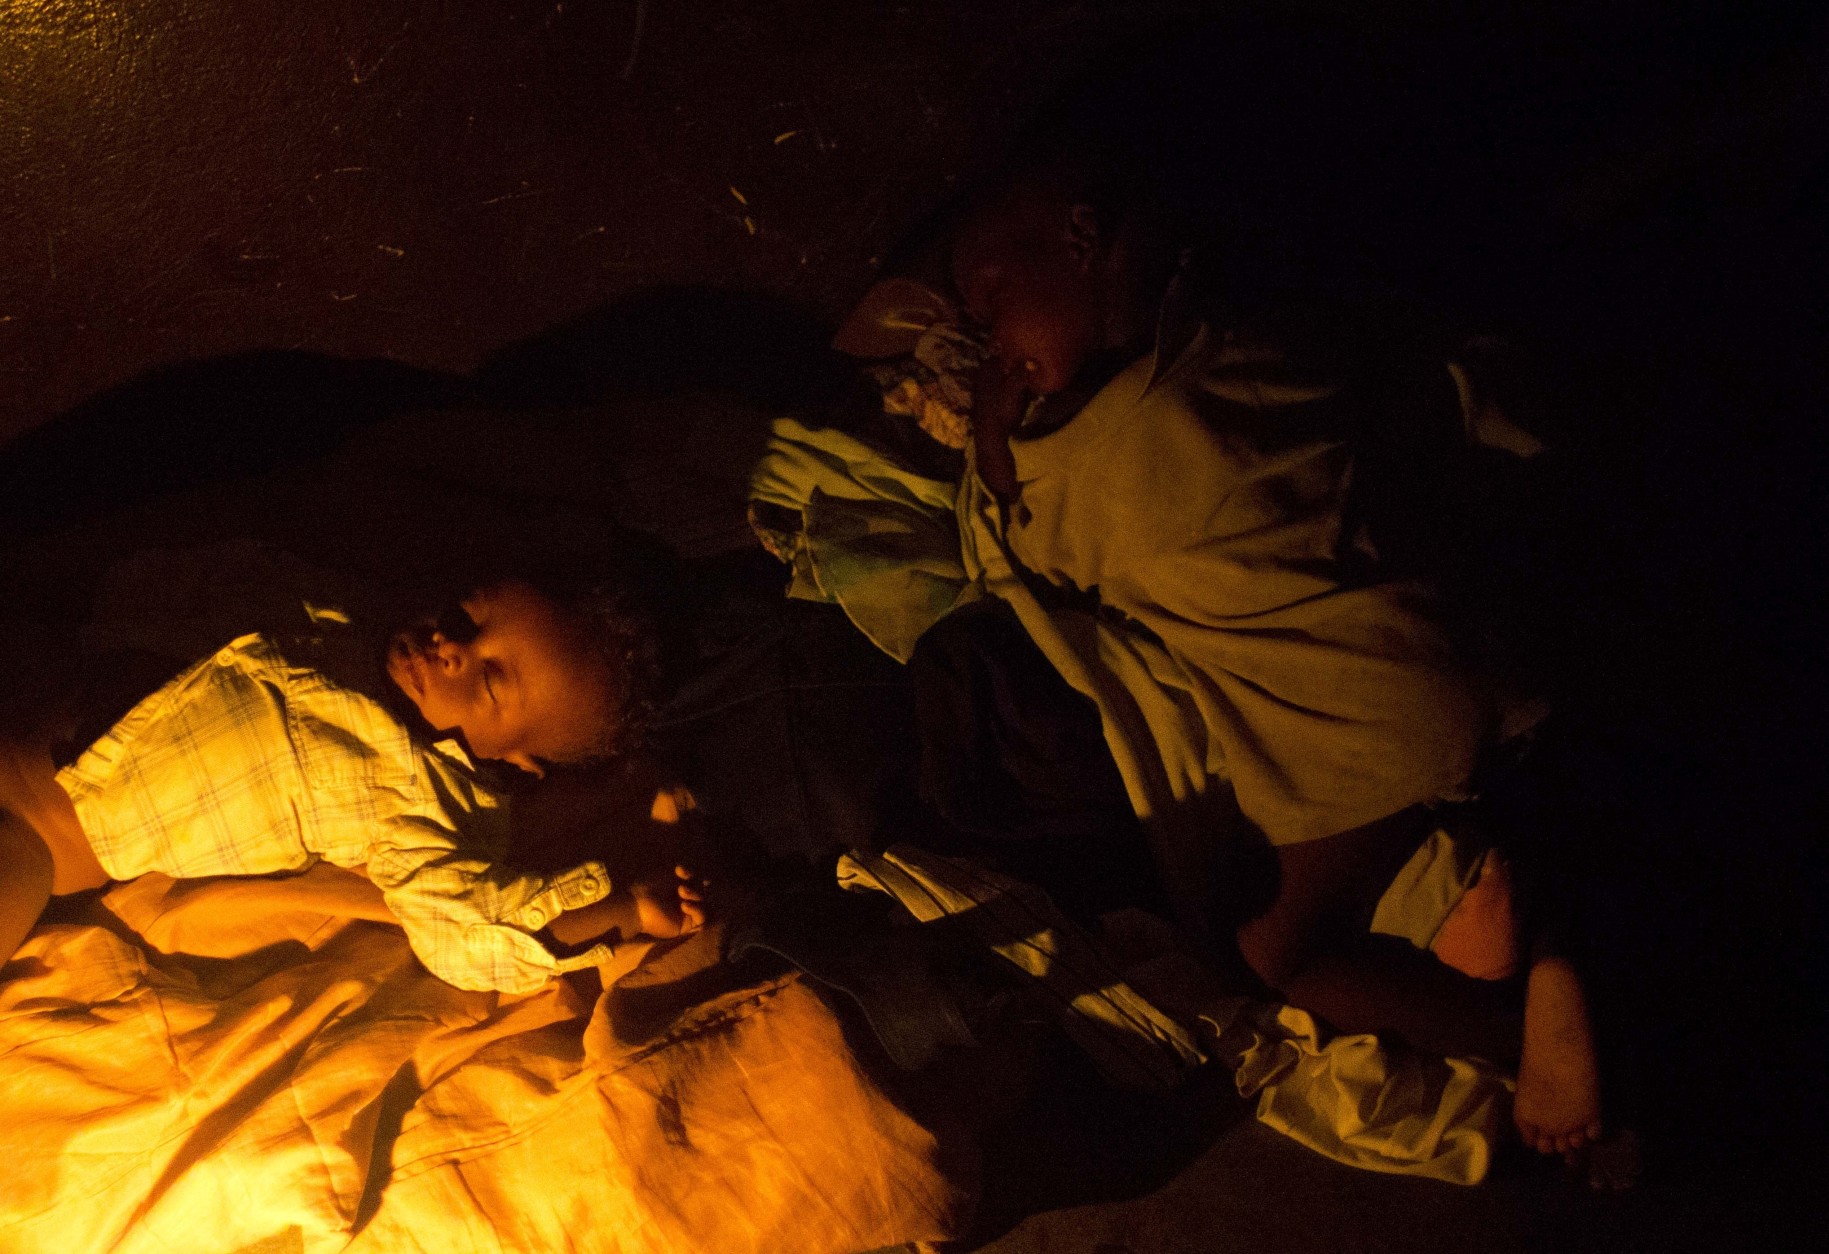 Children sleep in a shelter in Les Cayes, Haiti, Wednesday, Oct. 5, 2016. Hurricane Matthew slammed into Haiti's southwestern tip with howling, 145 mph winds destroying the bridge and cutting off road communication with the worst hit areas. ( AP Photo/Dieu Nalio Chery)